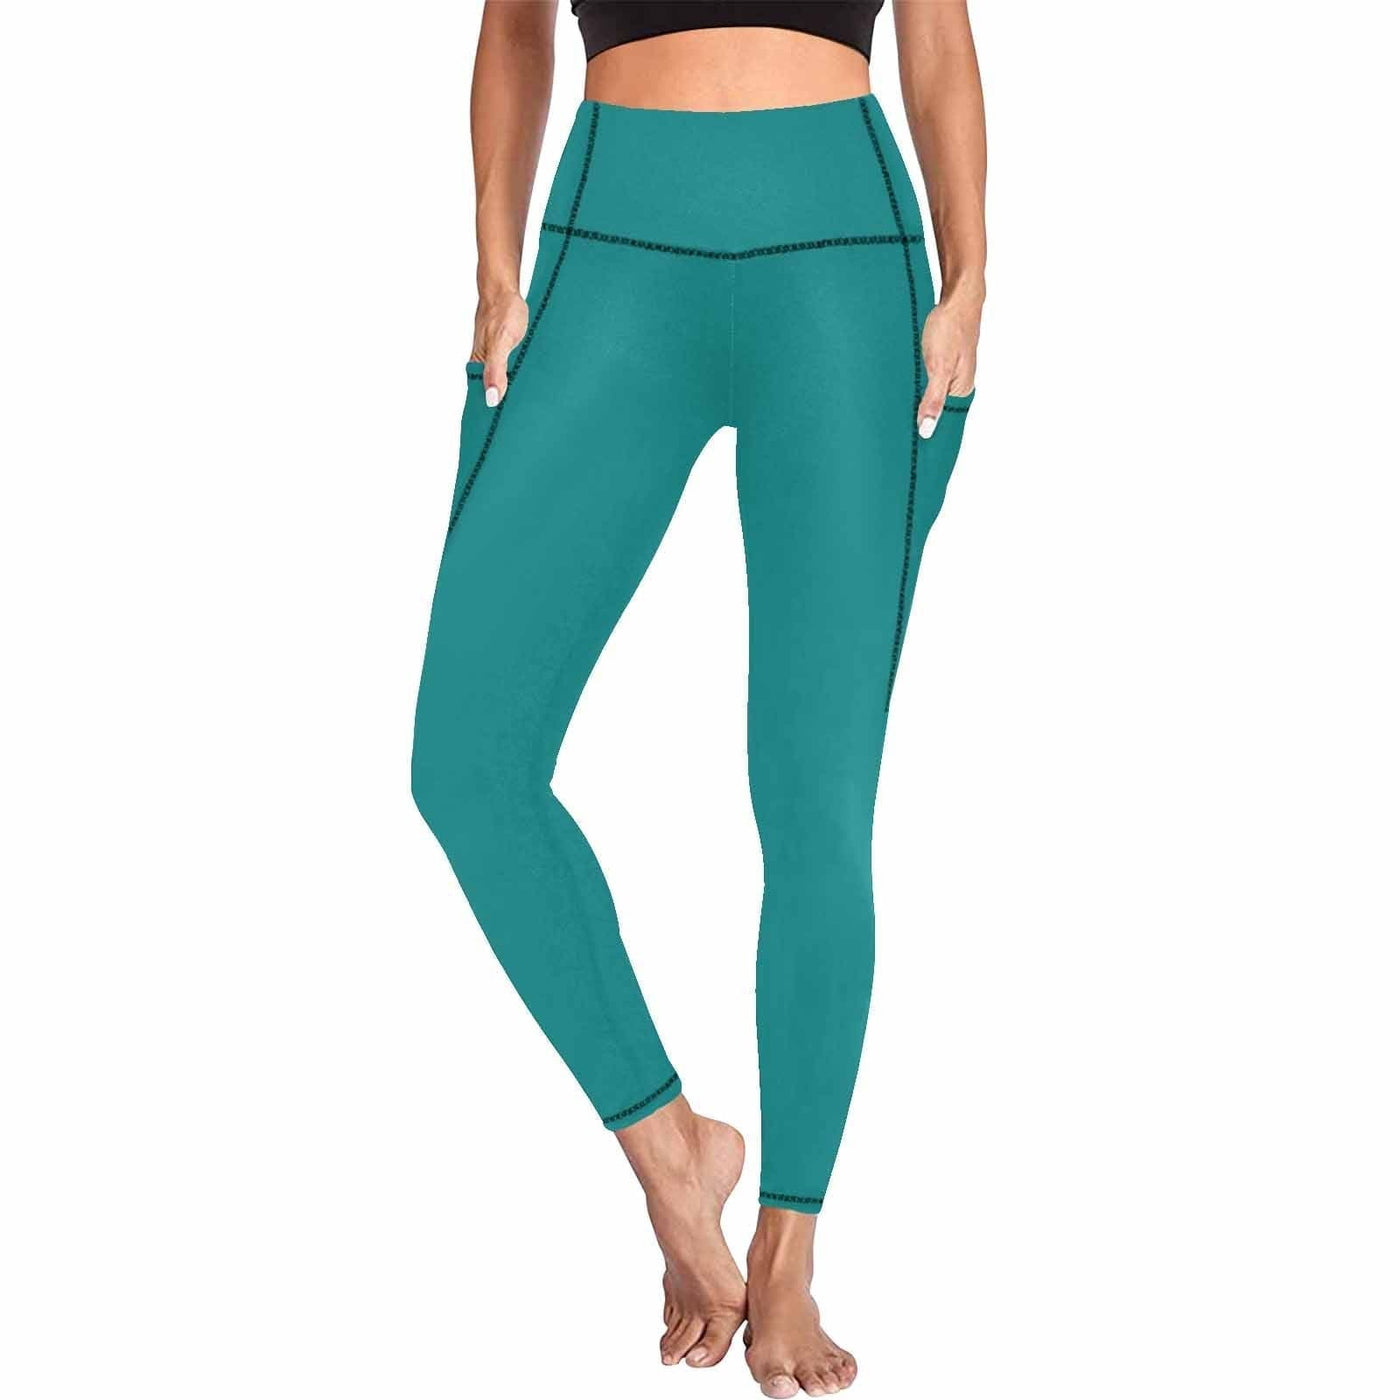 Womens Leggings With Pockets - Fitness Pants / Dark Teal Green - Womens